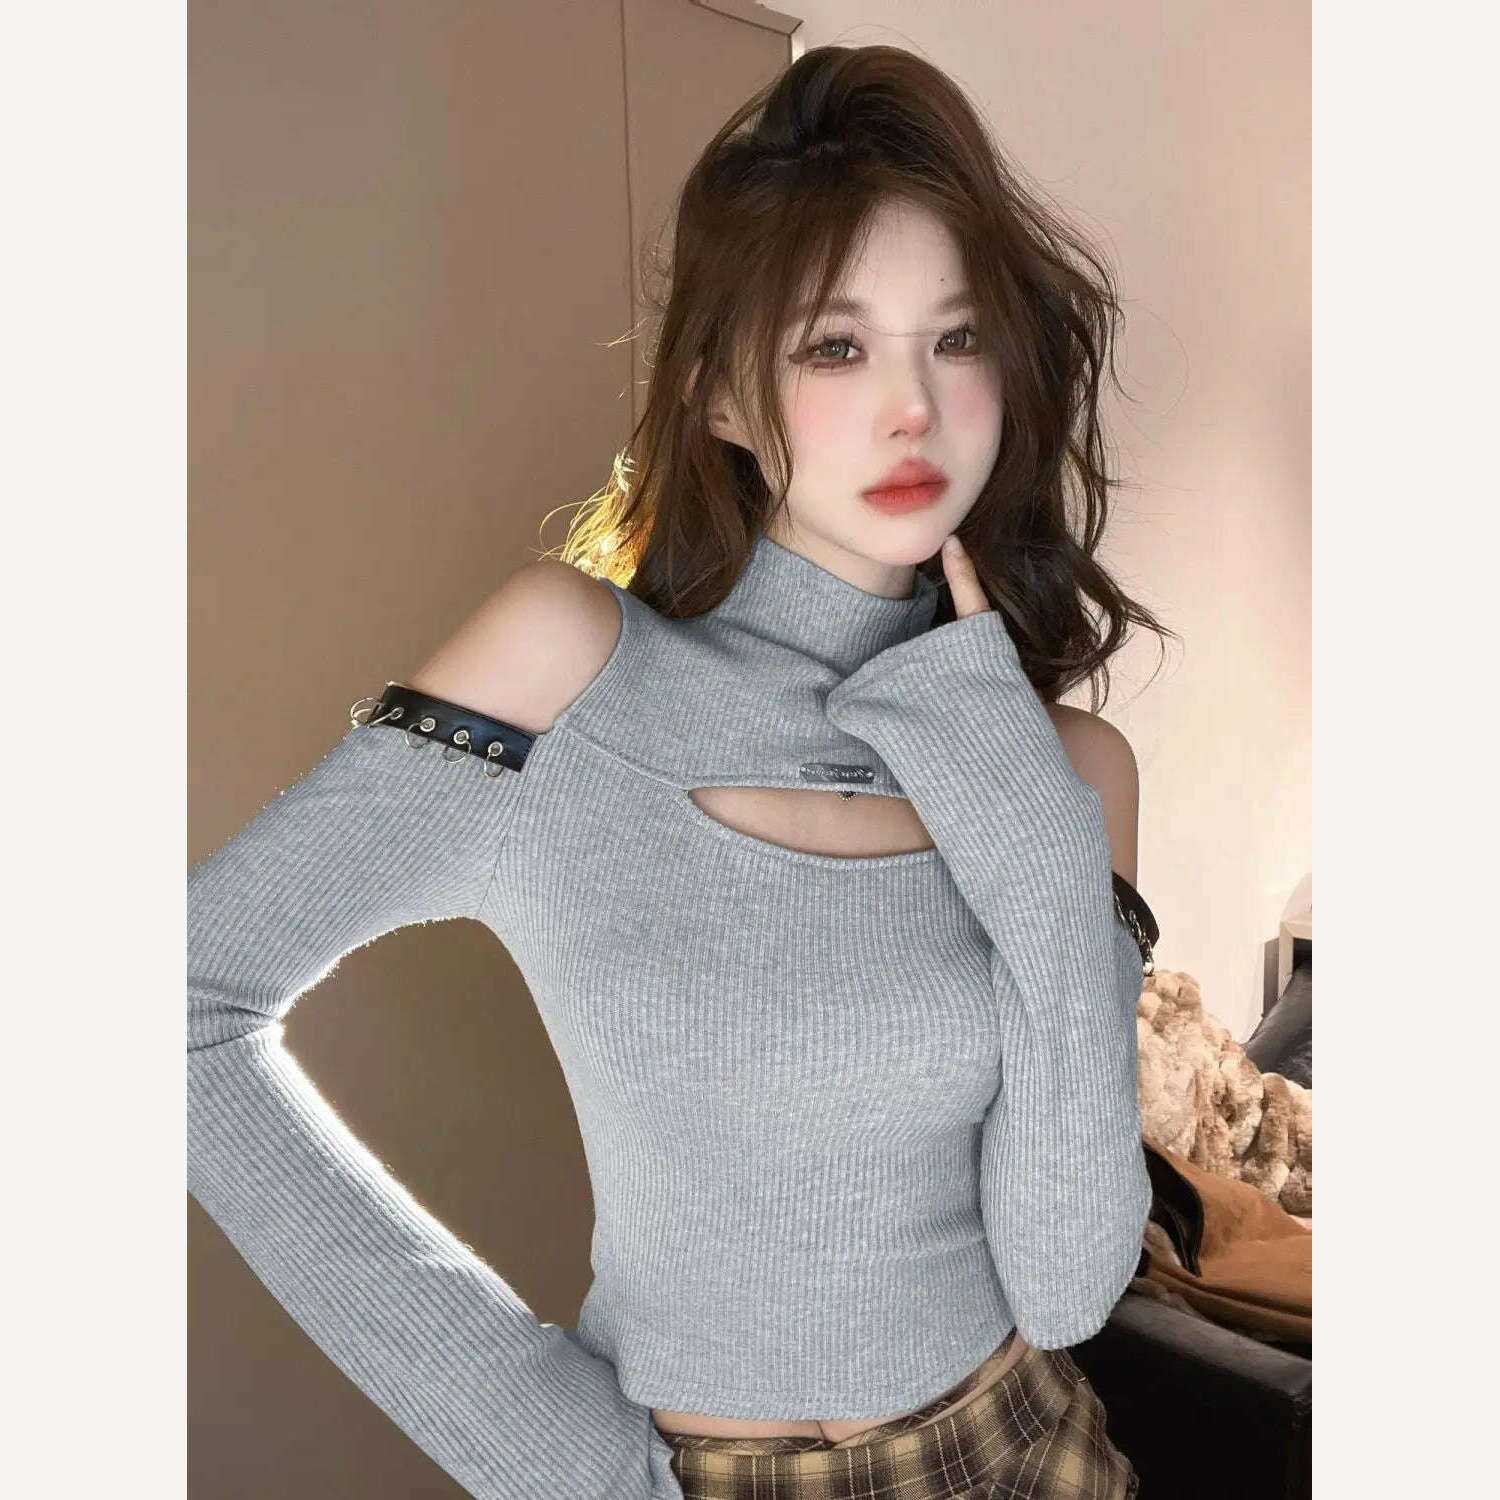 KIMLUD, Long Sleeve T-shirts Women Hollow Out Spliced Slim-fit Sexy Autumn Turtleneck All-match Off Shoulder Hot Girls Streetwear Soft, gray / S, KIMLUD Women's Clothes